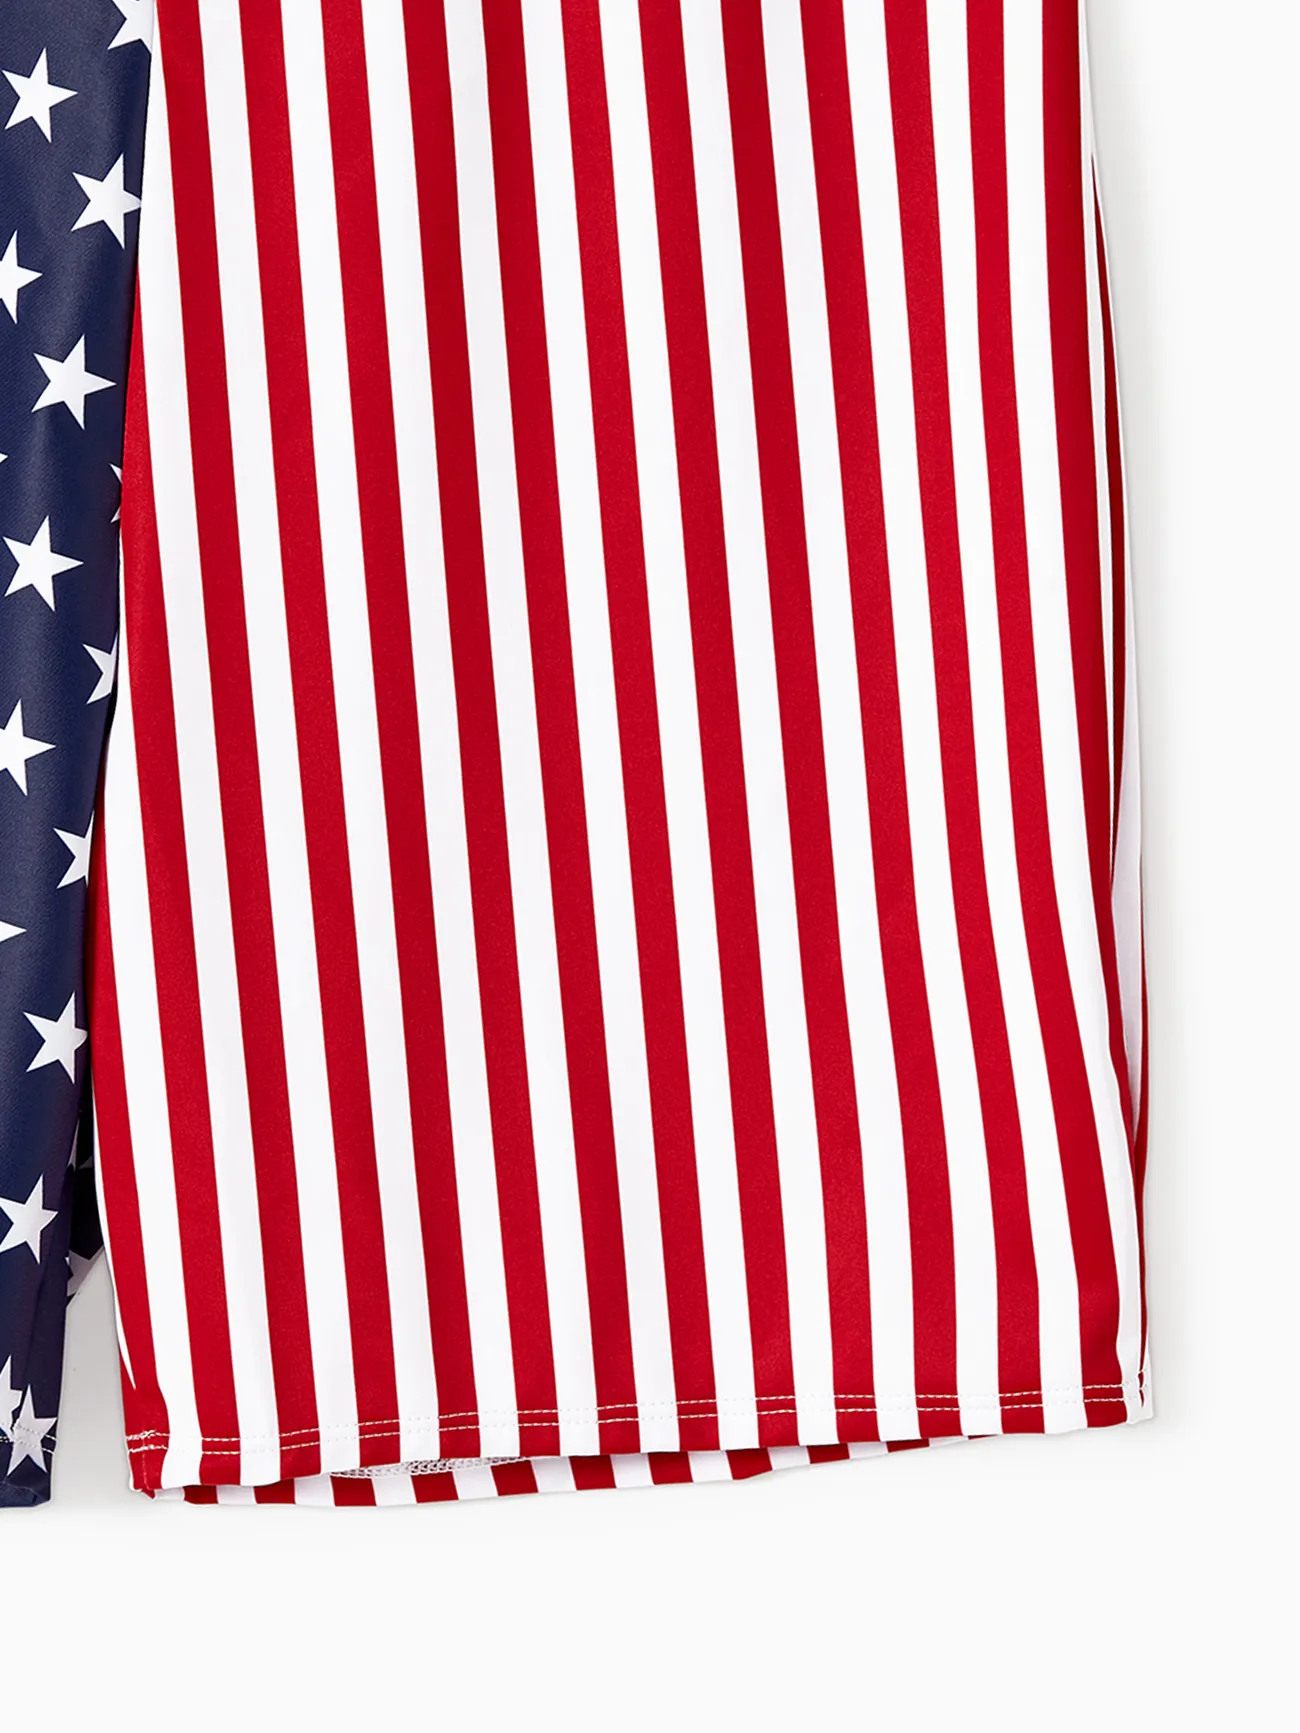 Independence Day Family Matching Star & Striped Spliced Knot Front Cut Out One-piece Swimsuit or Swim Trunks Shorts Multi-color big image 1